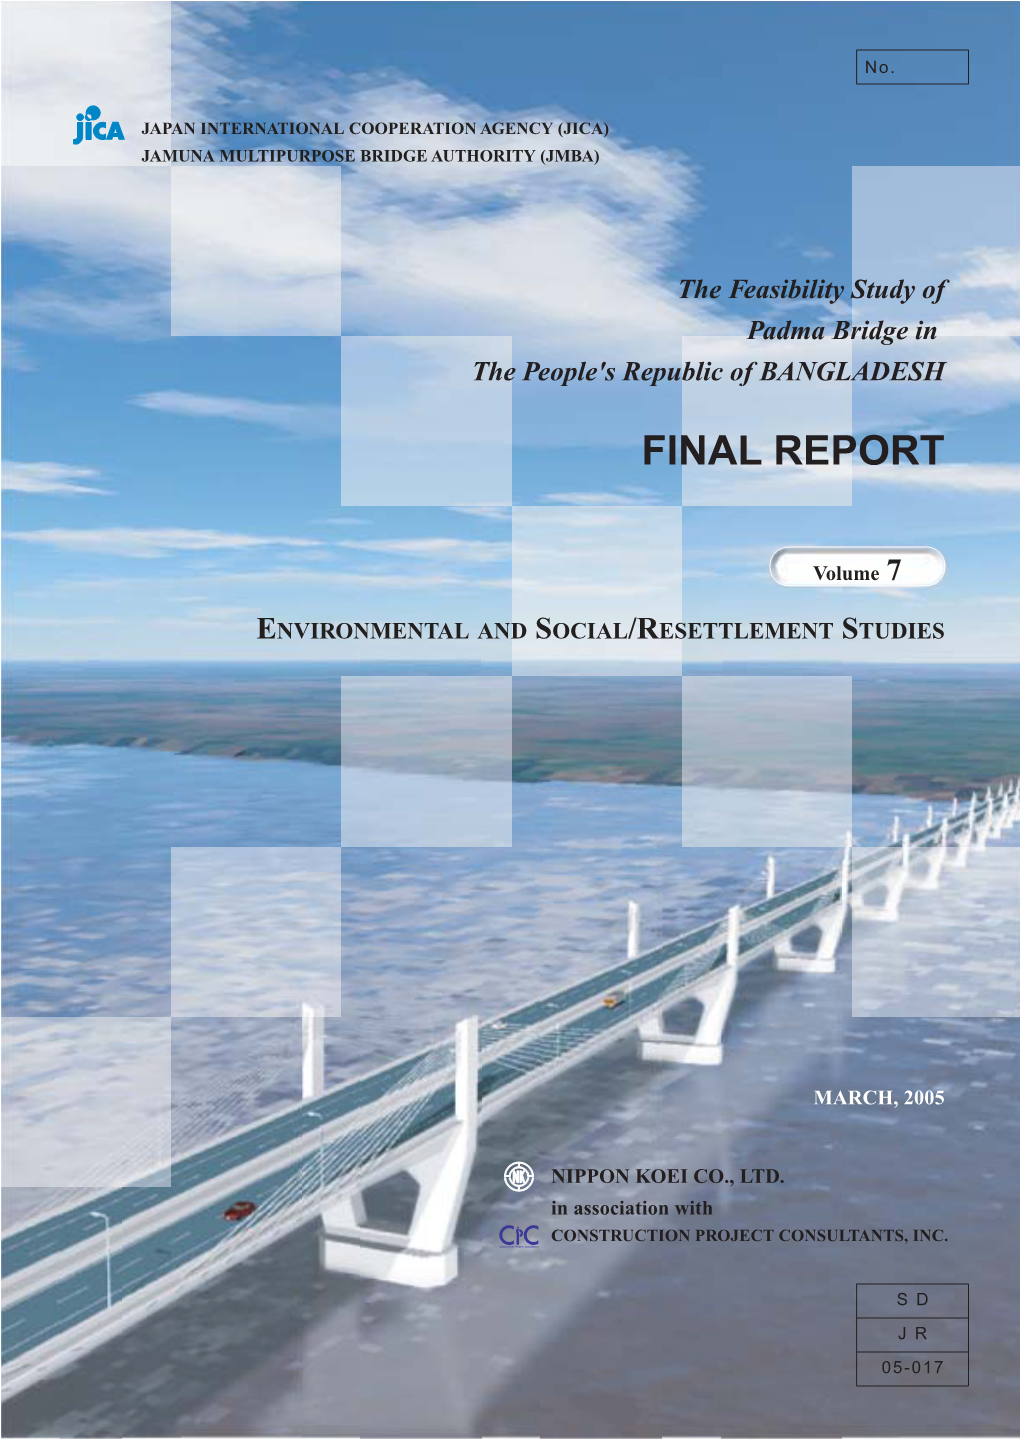 The Feasibility Study of Padma Bridge in the People's Republic of BANGLADESH FINAL REPORT